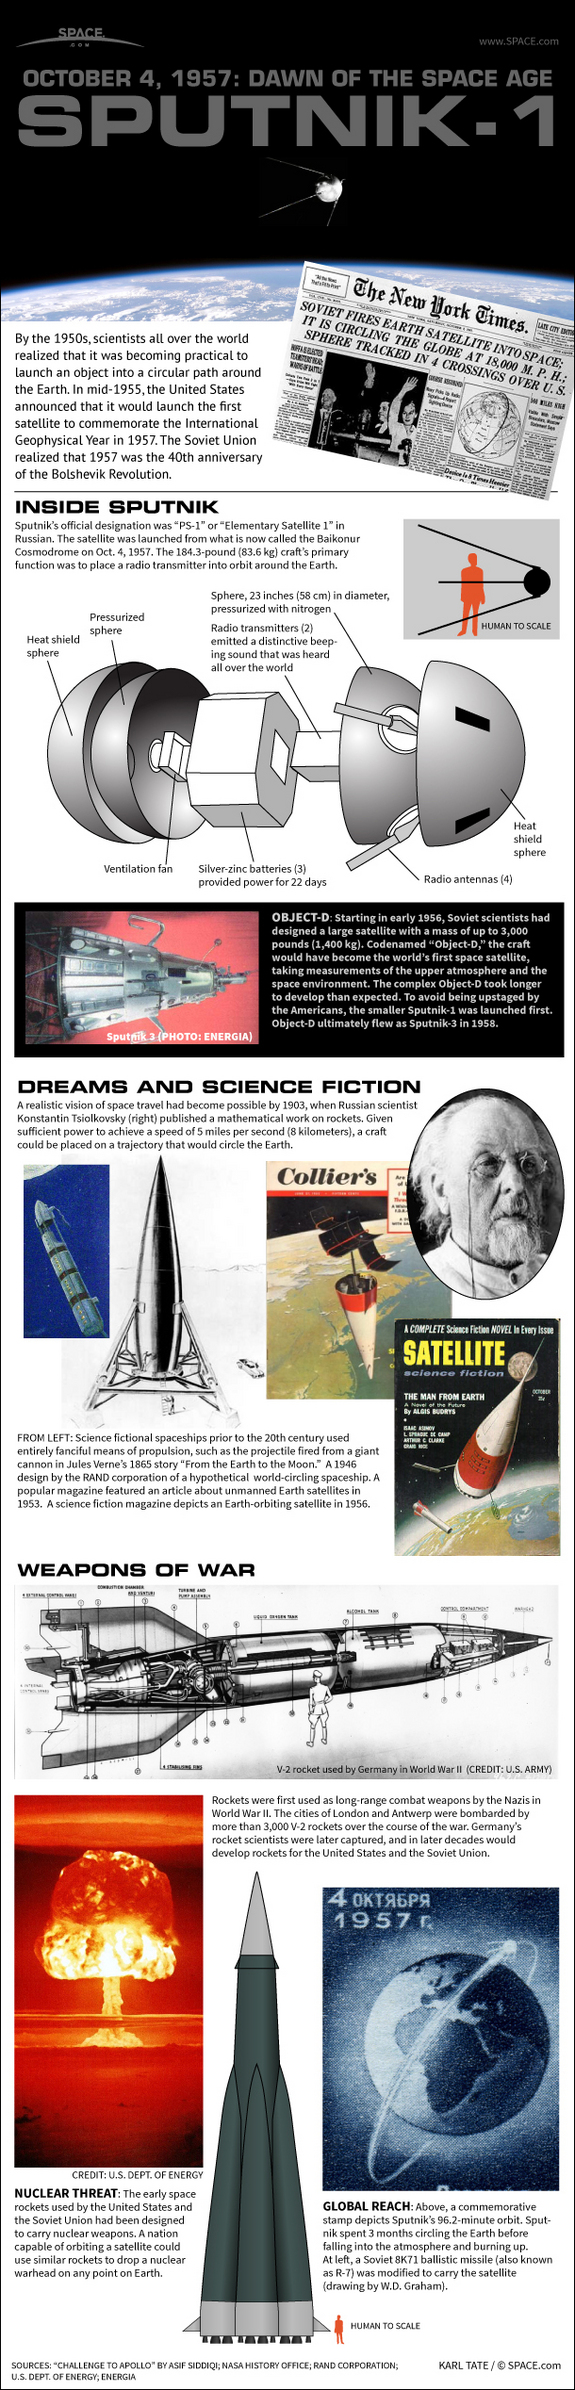 Find out how Russia launched the world's first satellite, Sputnik-1, in this SPACE.com infographic.